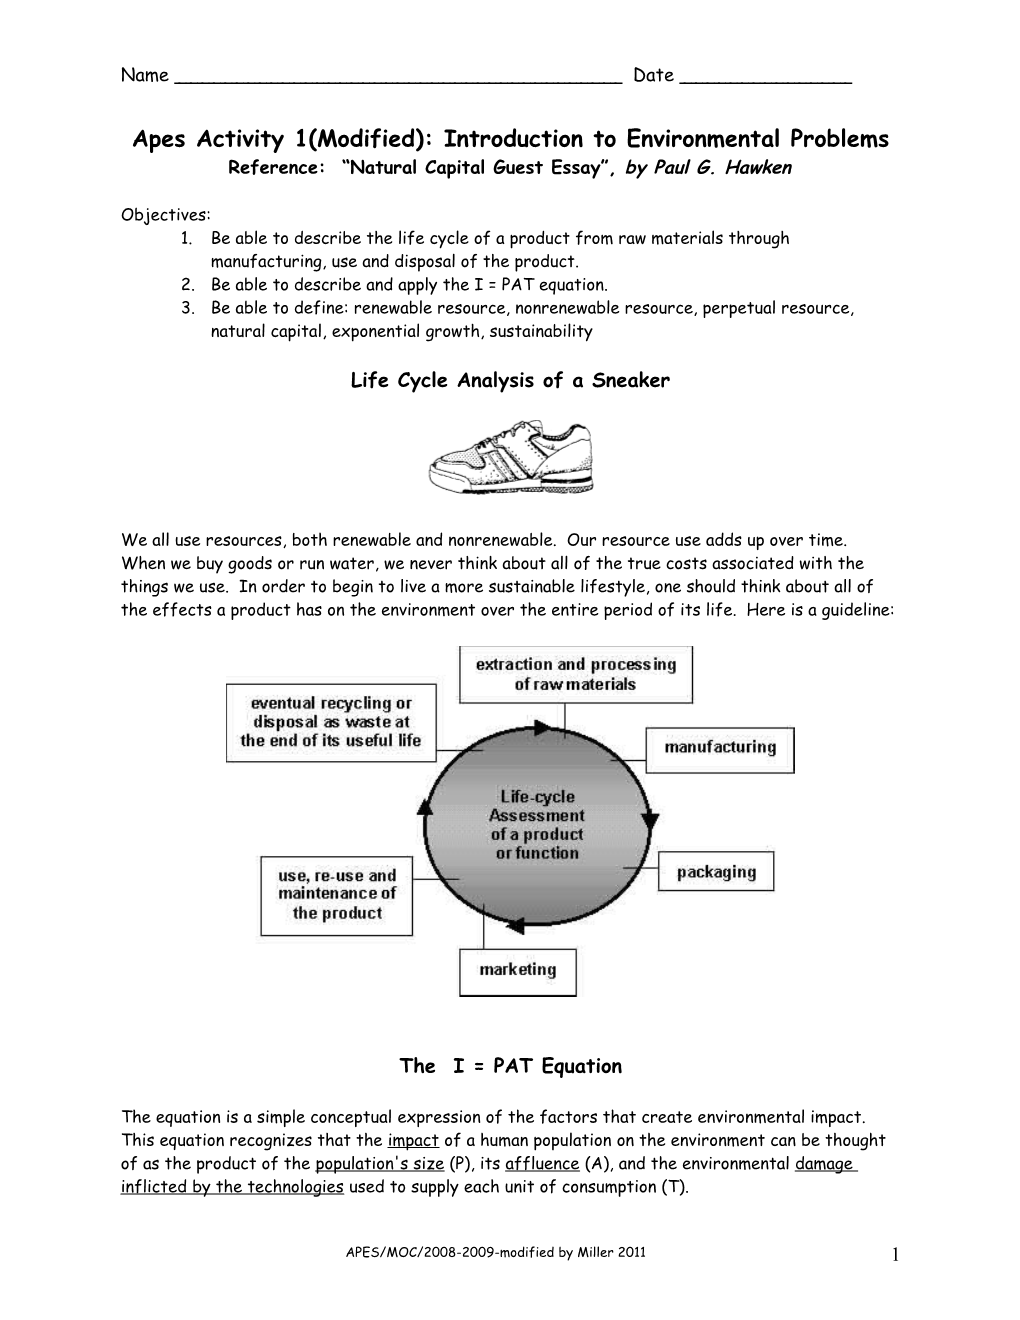 Apes Activity 1: Life Cycle Analysis